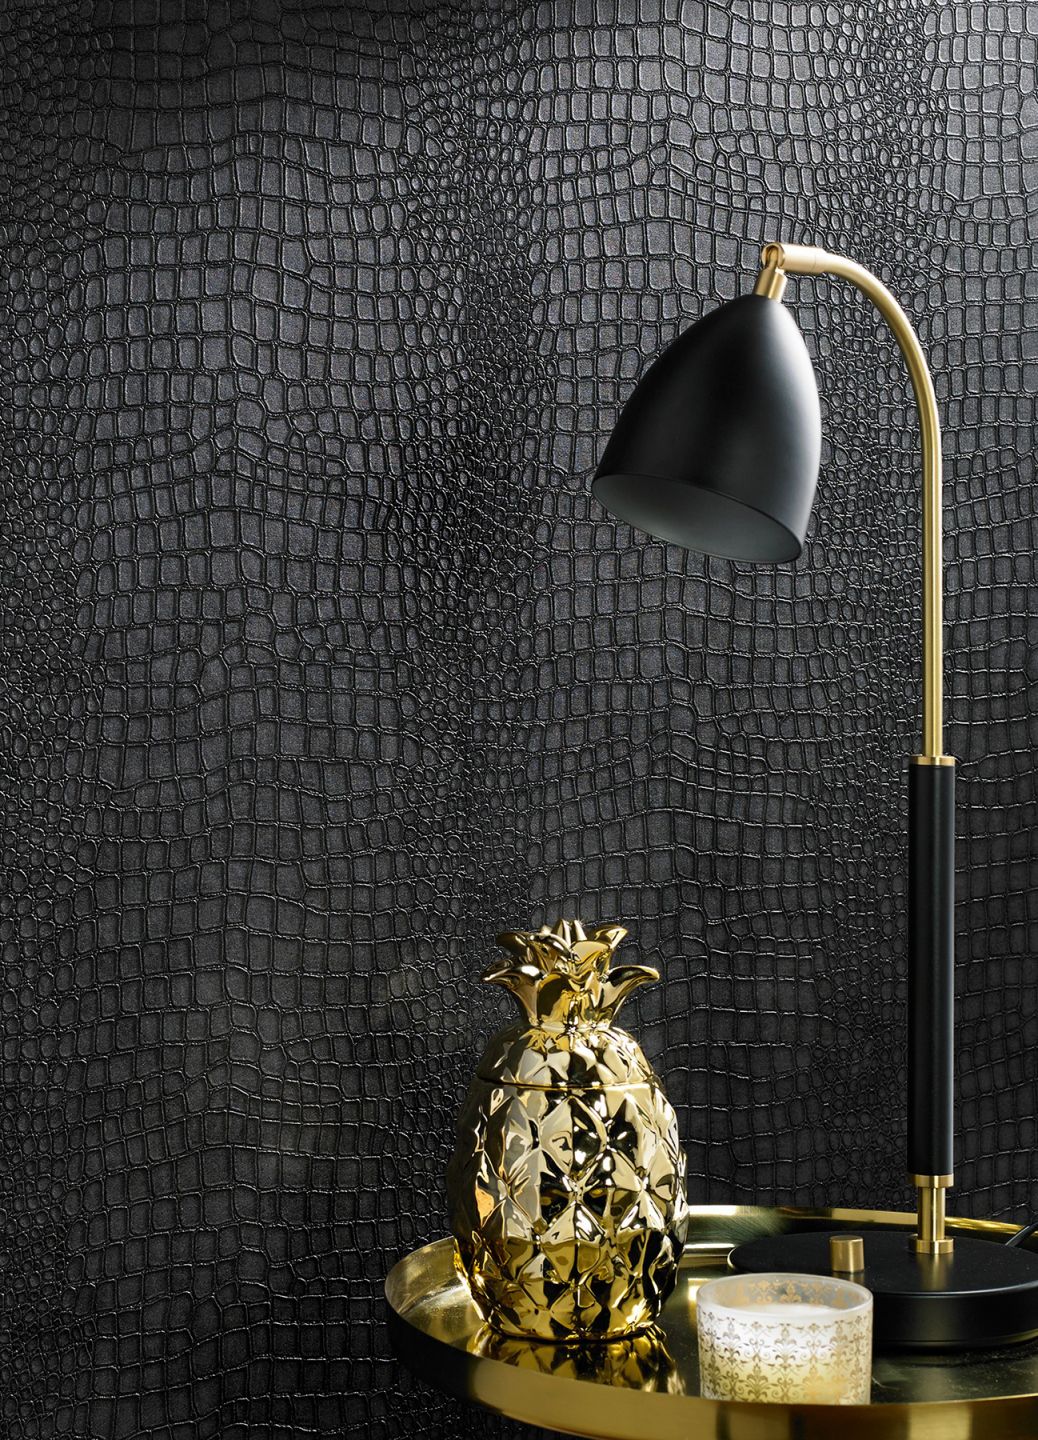 A black leather-look crocodile-skin wallpaper behind a golden side table with a lamp and a golden decorative pineapple